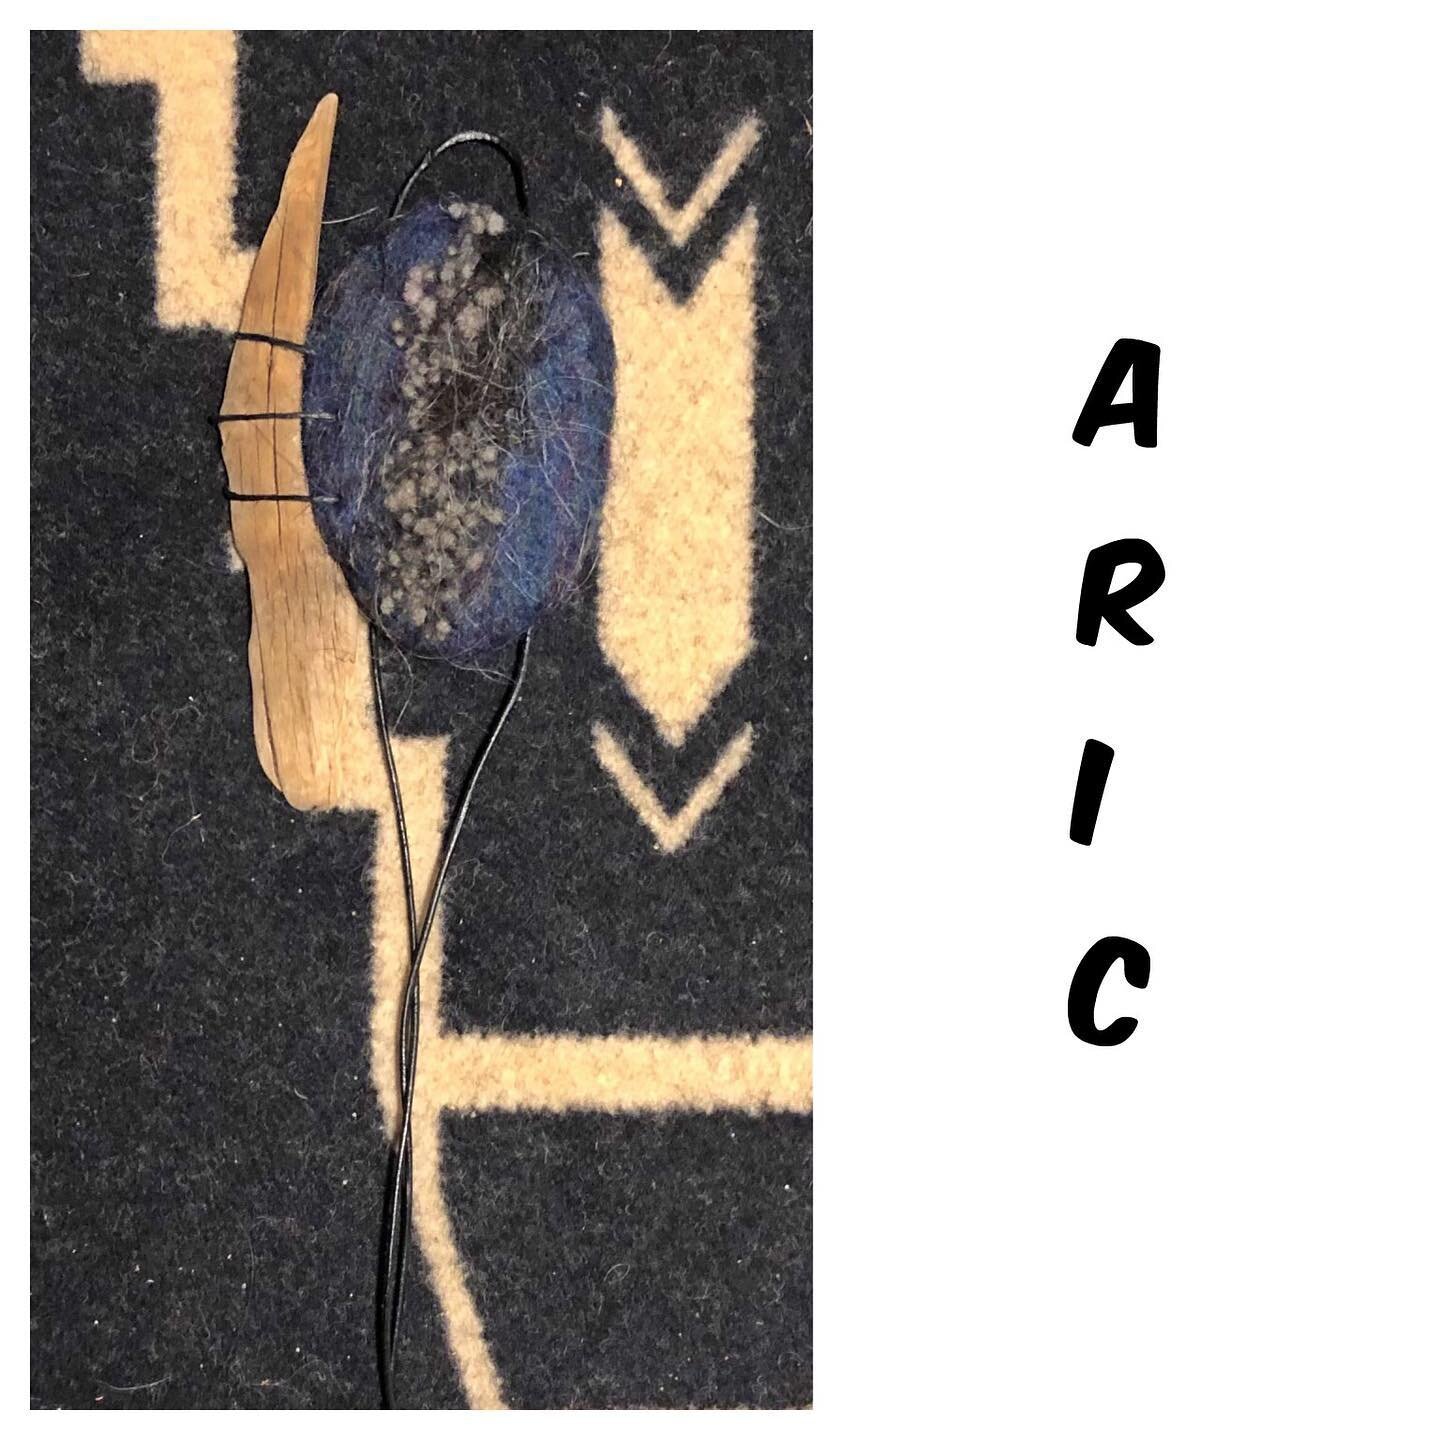 Aric is an old Norse name and seemed to fit this totem. He hangs right next to my desk and reminds me of inner strength and personal power. His energy lends to the mediation intention I received for this week- 

Journey to the upper or lower world or